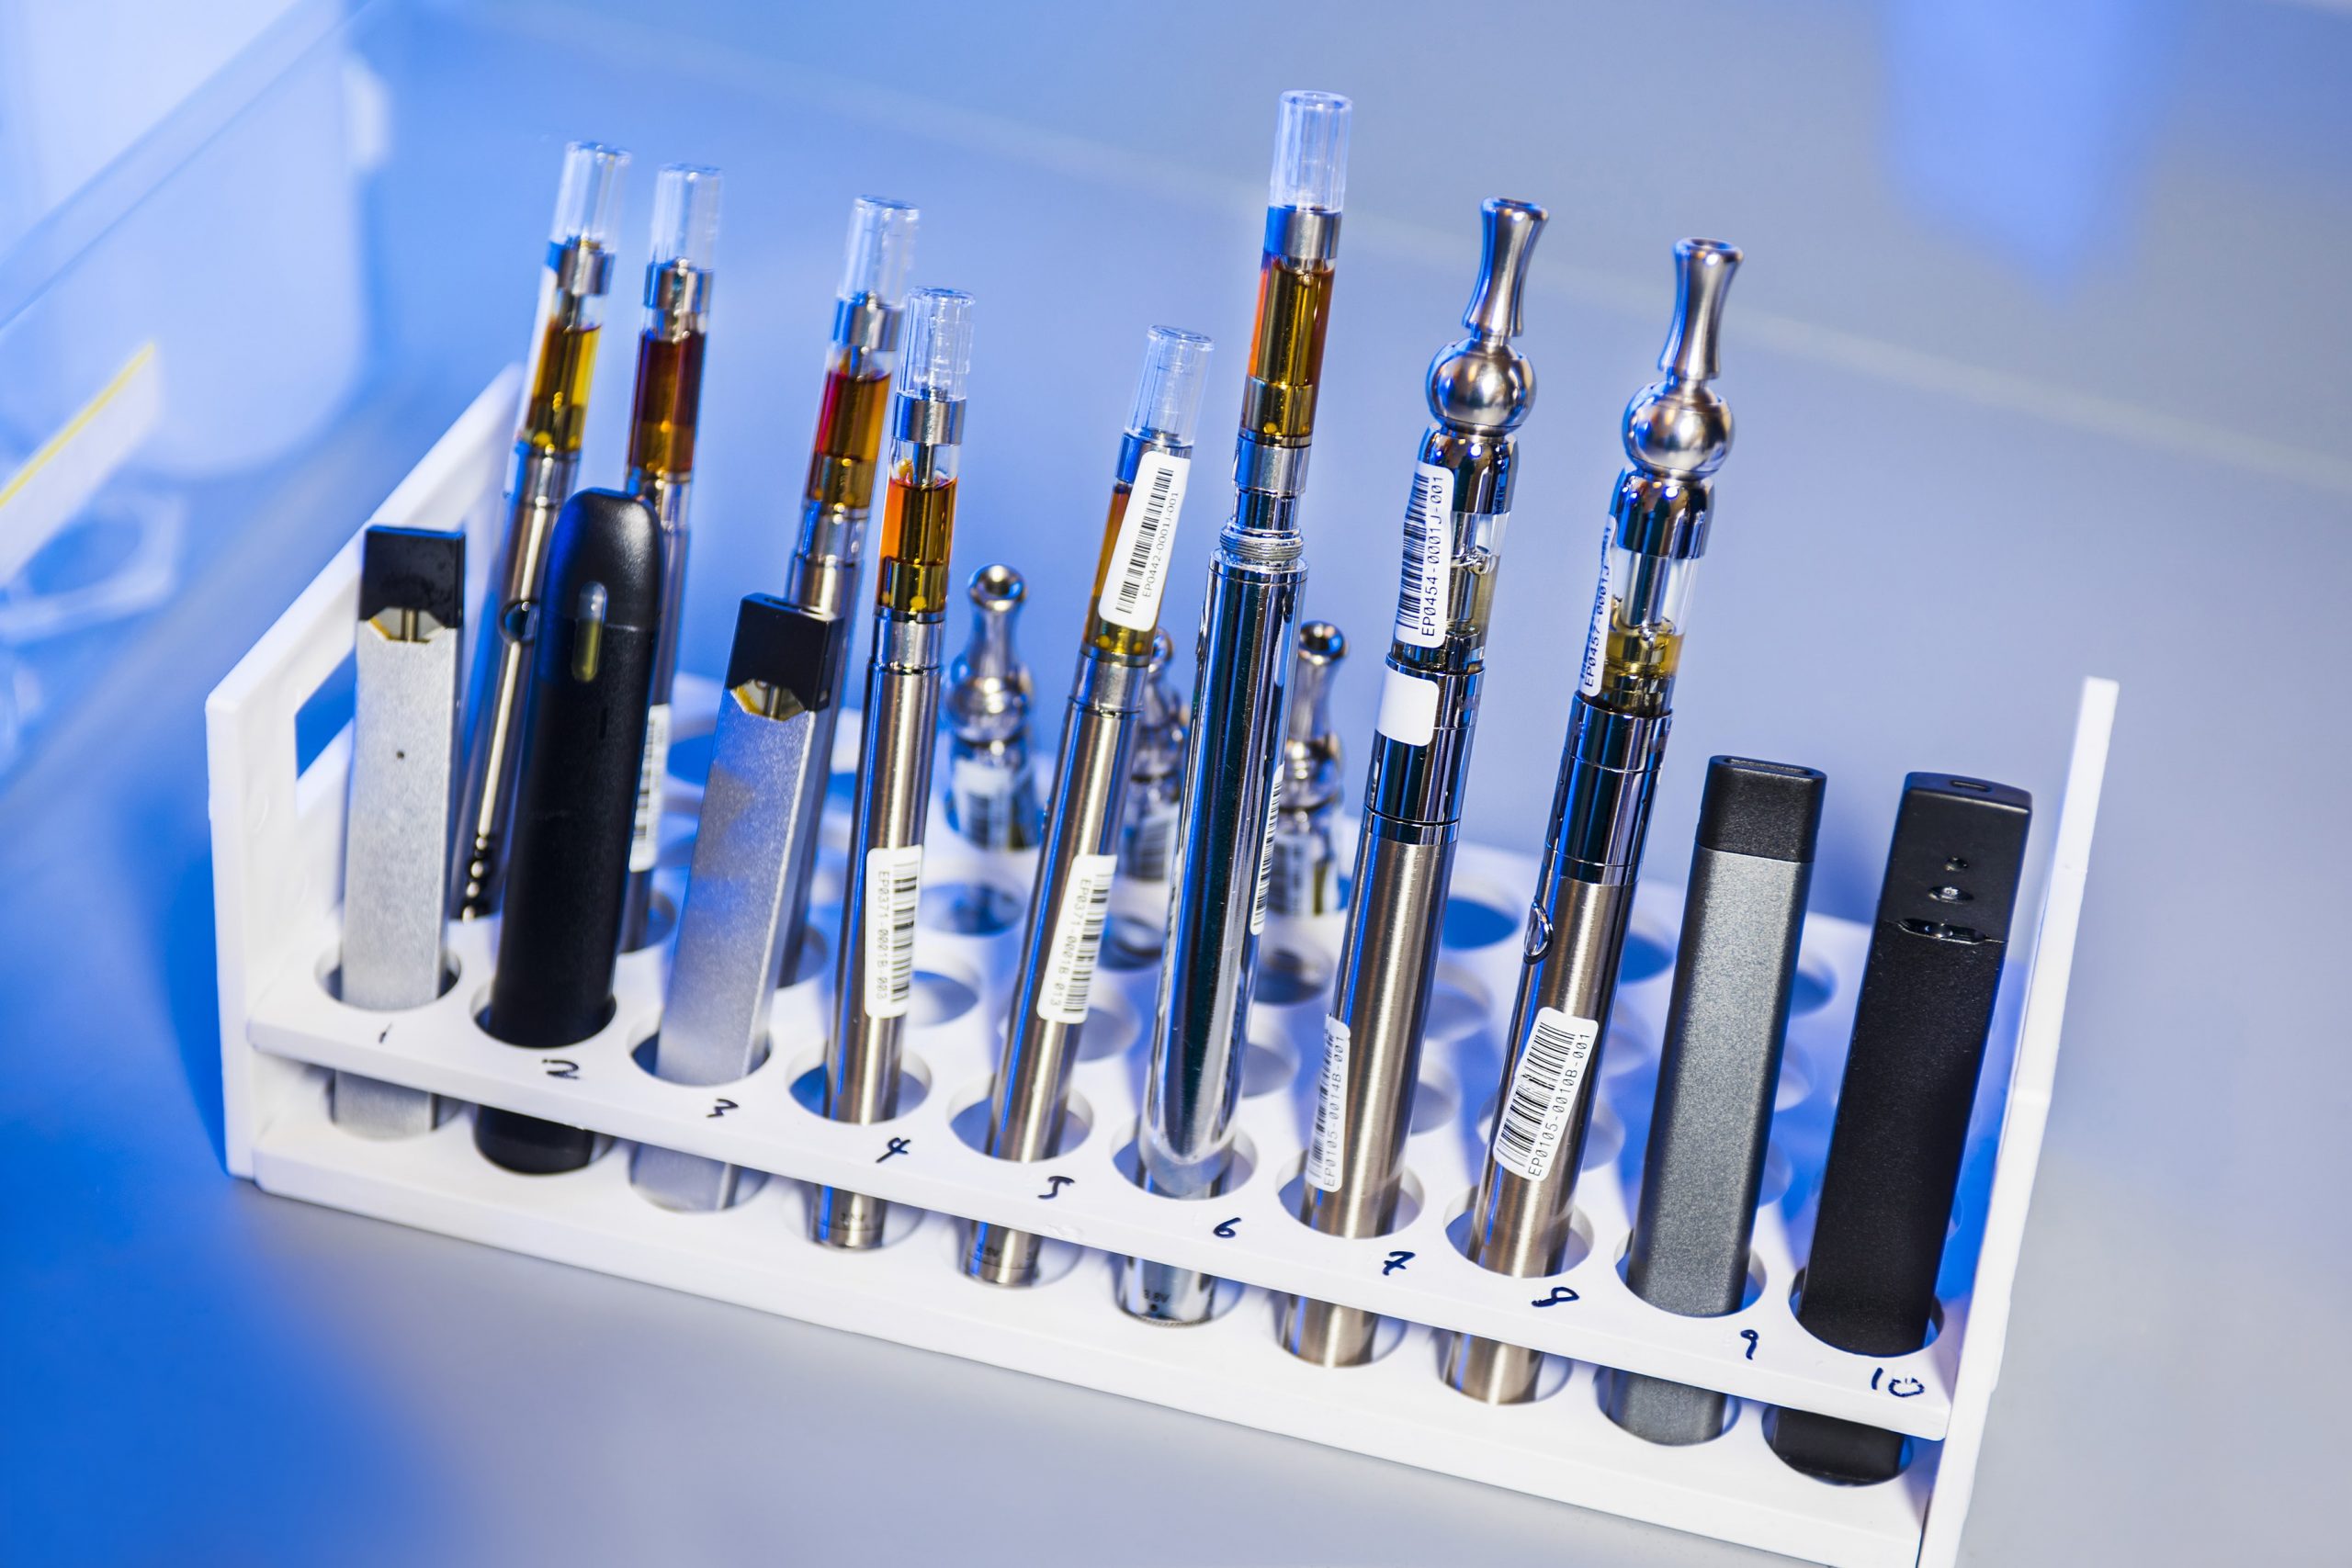 An assortment of vape devices and oils